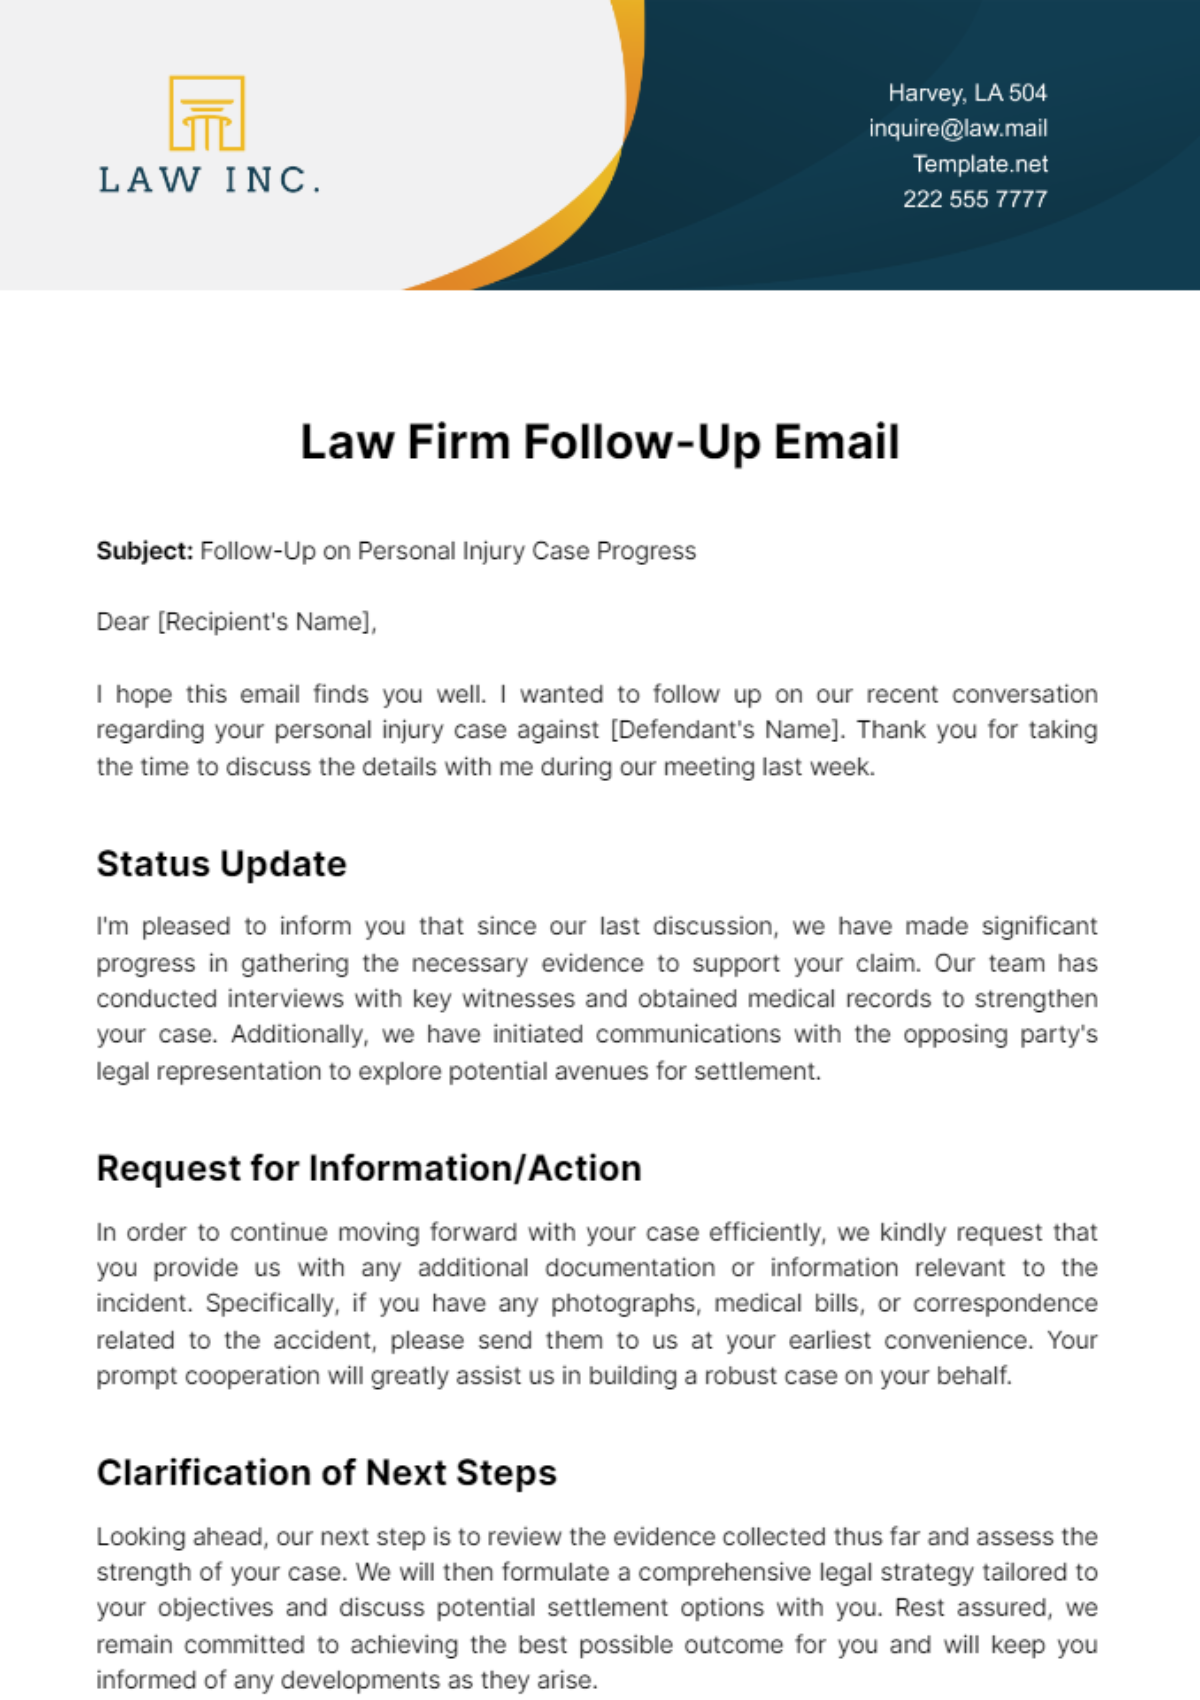 Law Firm Follow-Up Email Template